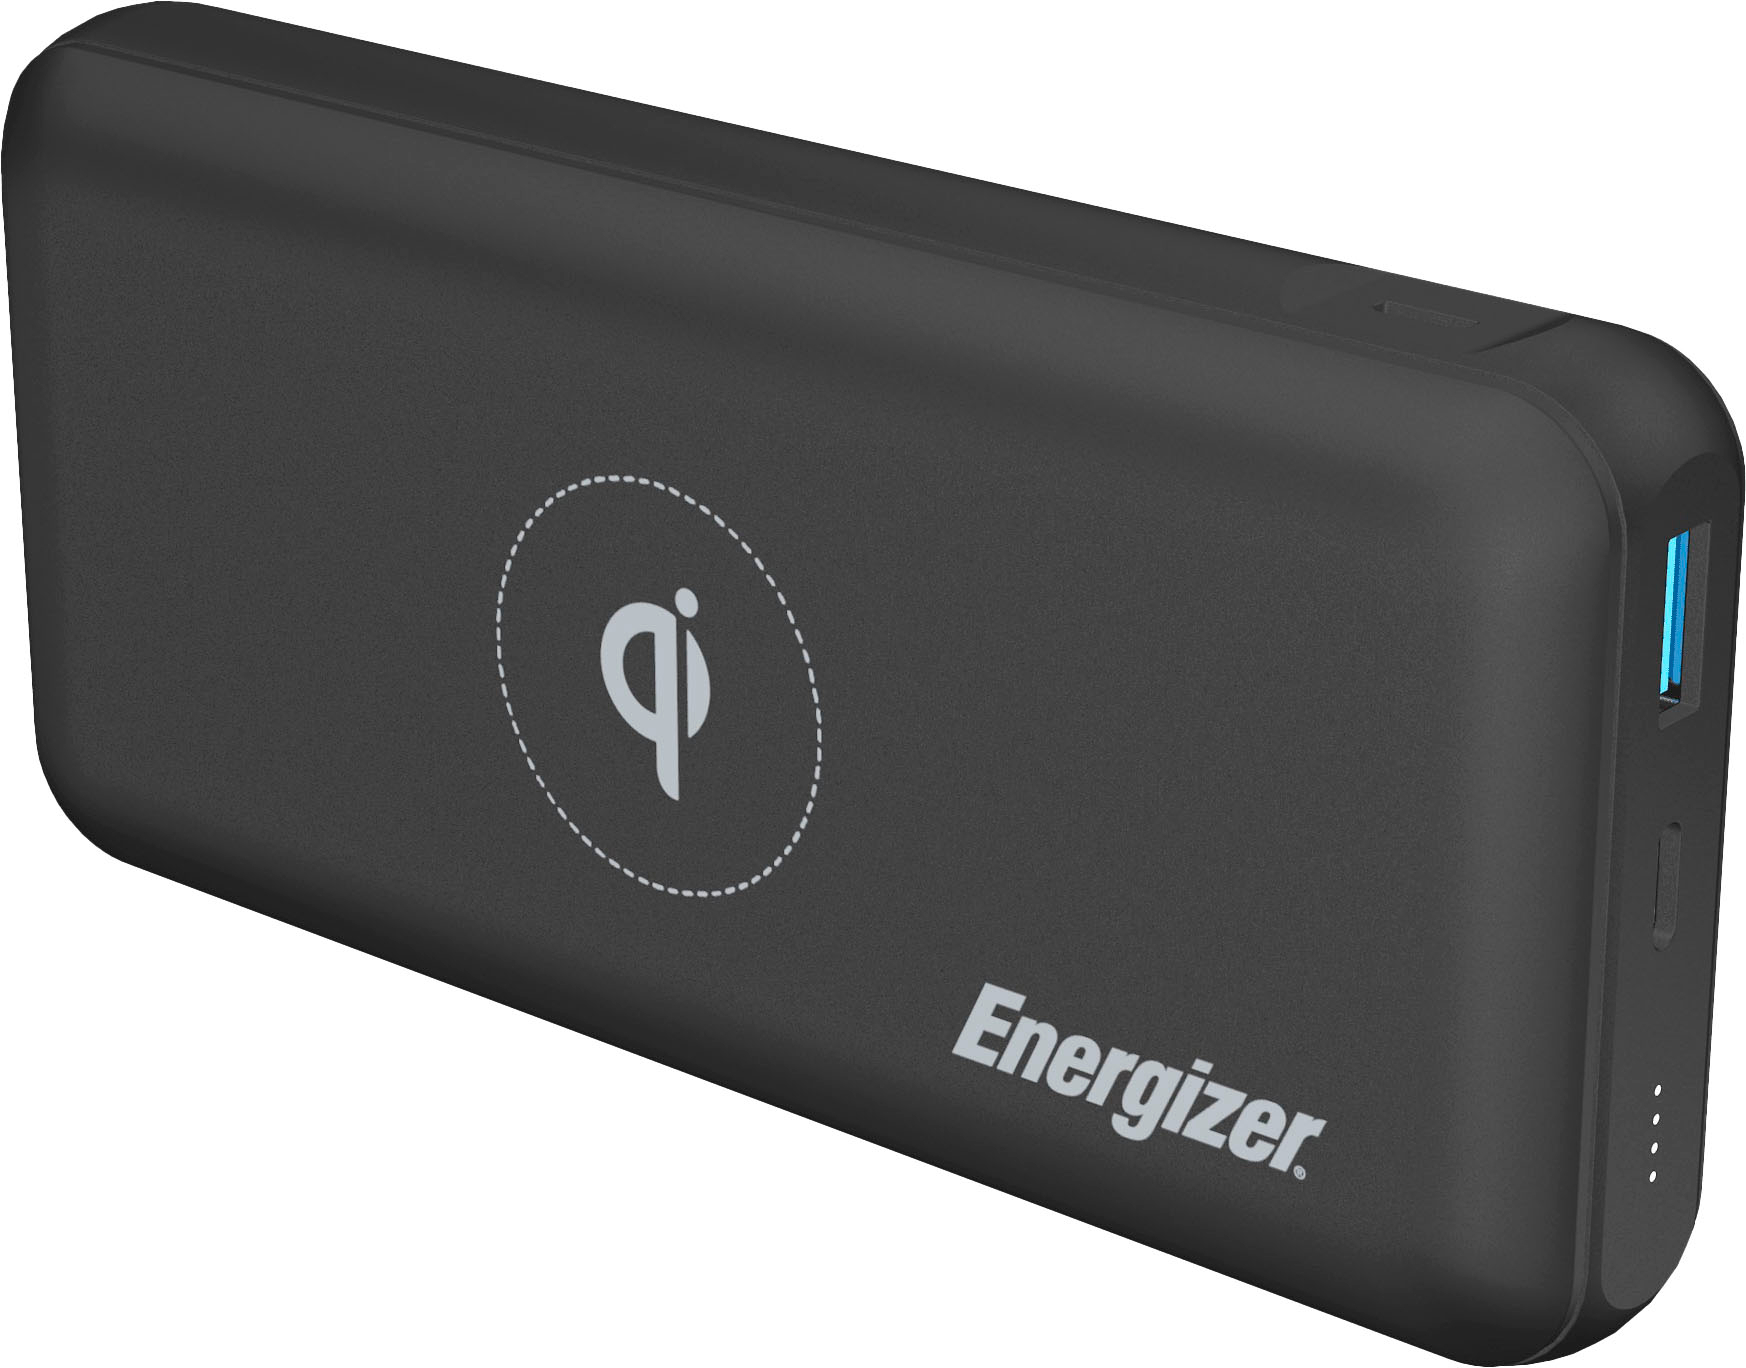 Energizer Ultimate Lithium 20,000mAh Qi Wireless Portable Charger/Power Bank QC 3.0 & PD 3.0 Apple, Android, USB Devices Black QE20007PQ - Best Buy